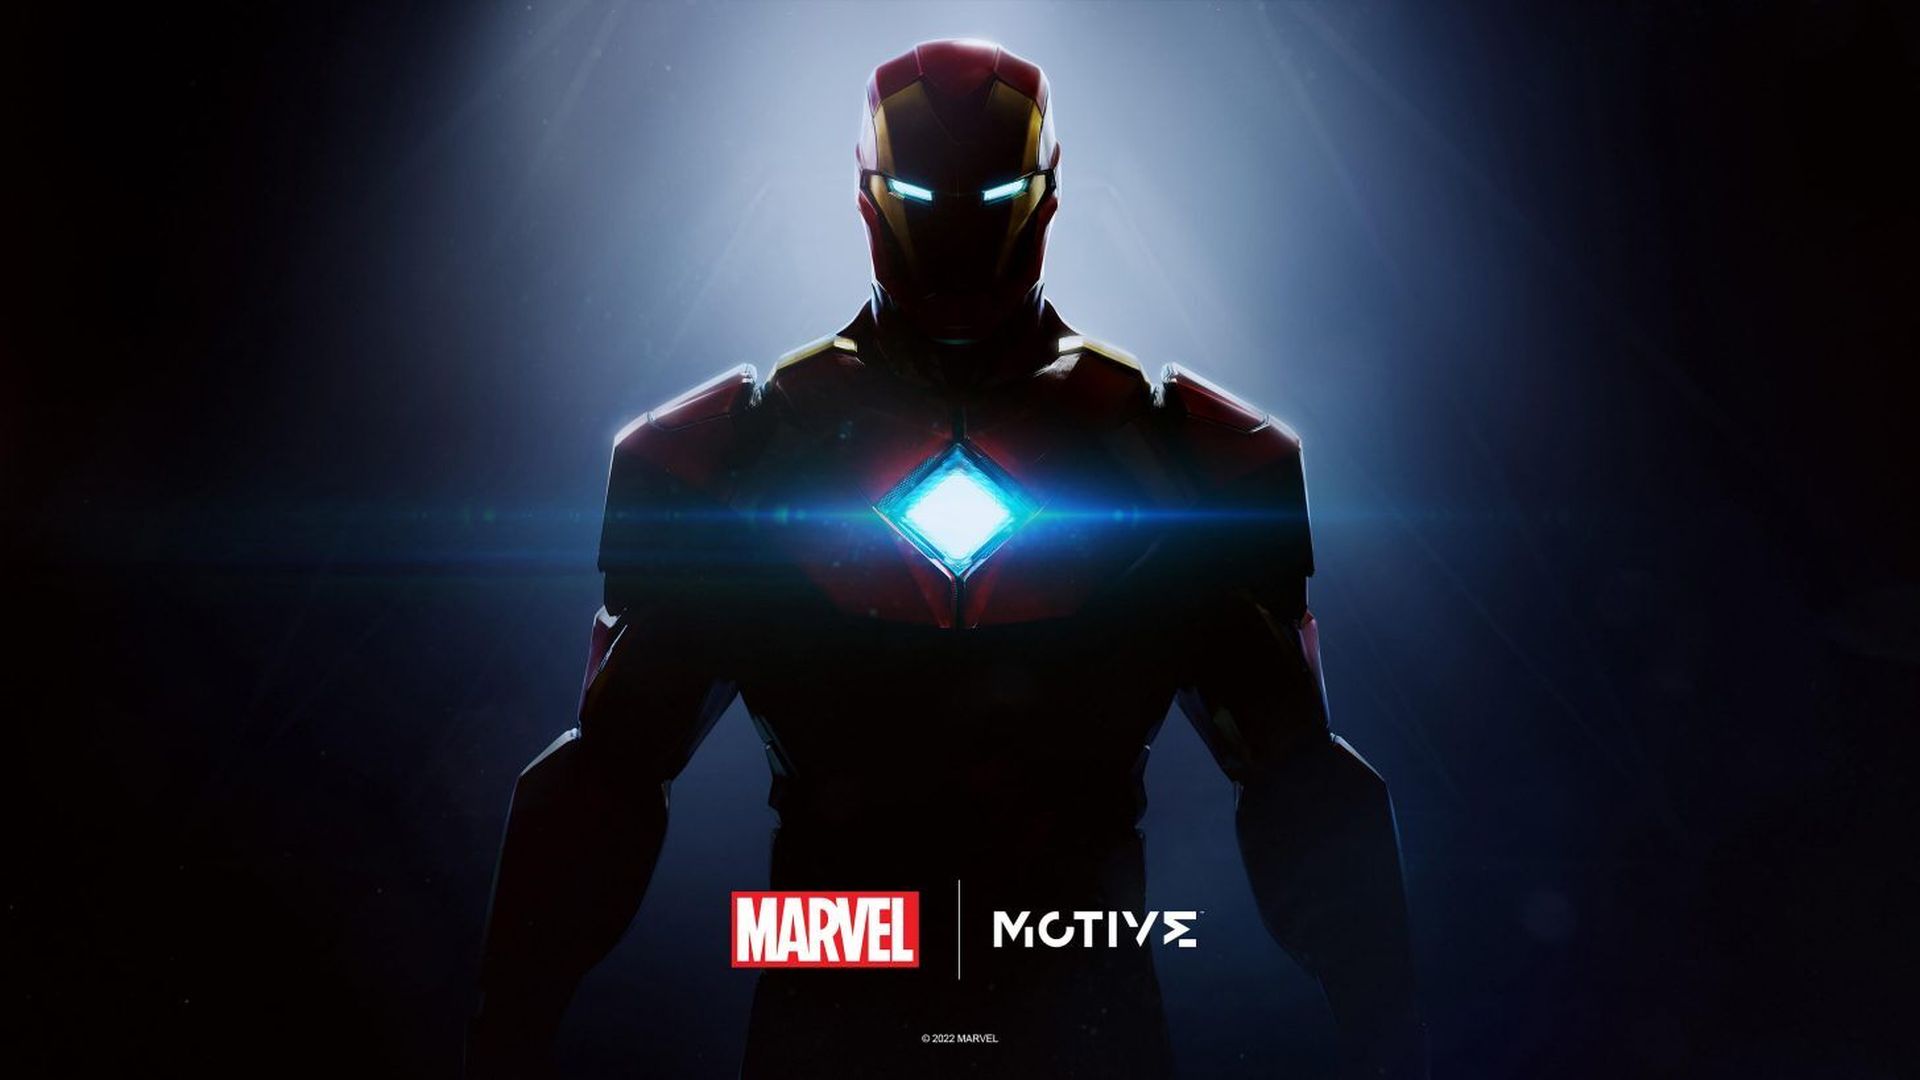 EA Motive’s Iron Man Game is Being Built on Unreal Engine 5, Job Ad Confirms